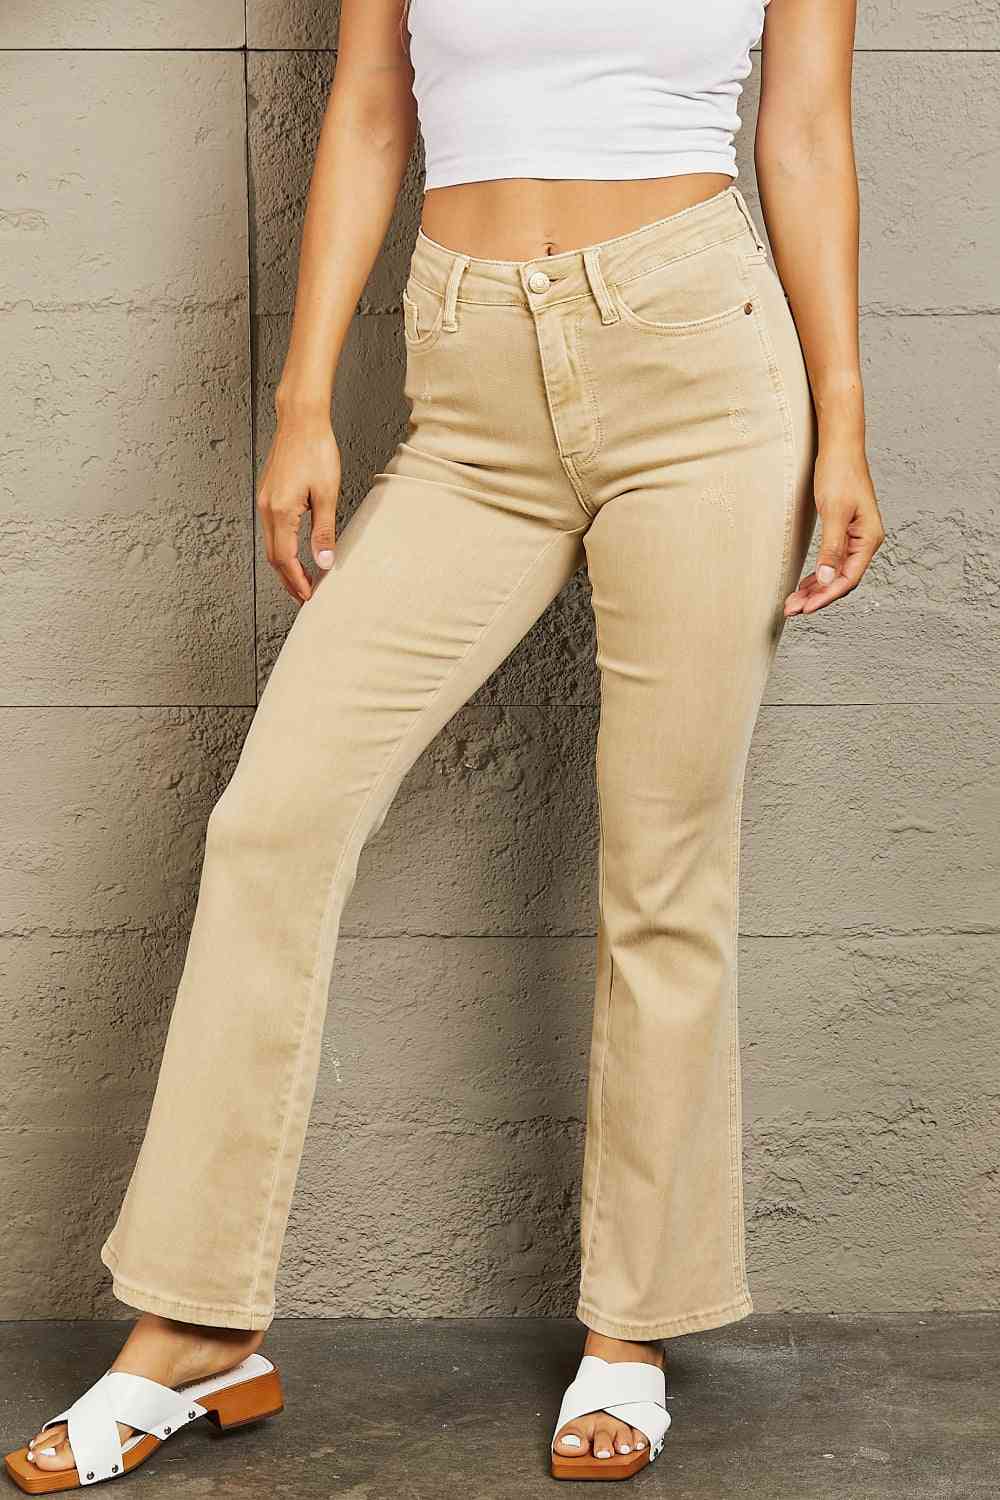 Judy Blue Cailin Full Size Mid Rise Garment Dyed Bootcut Jeans Tan